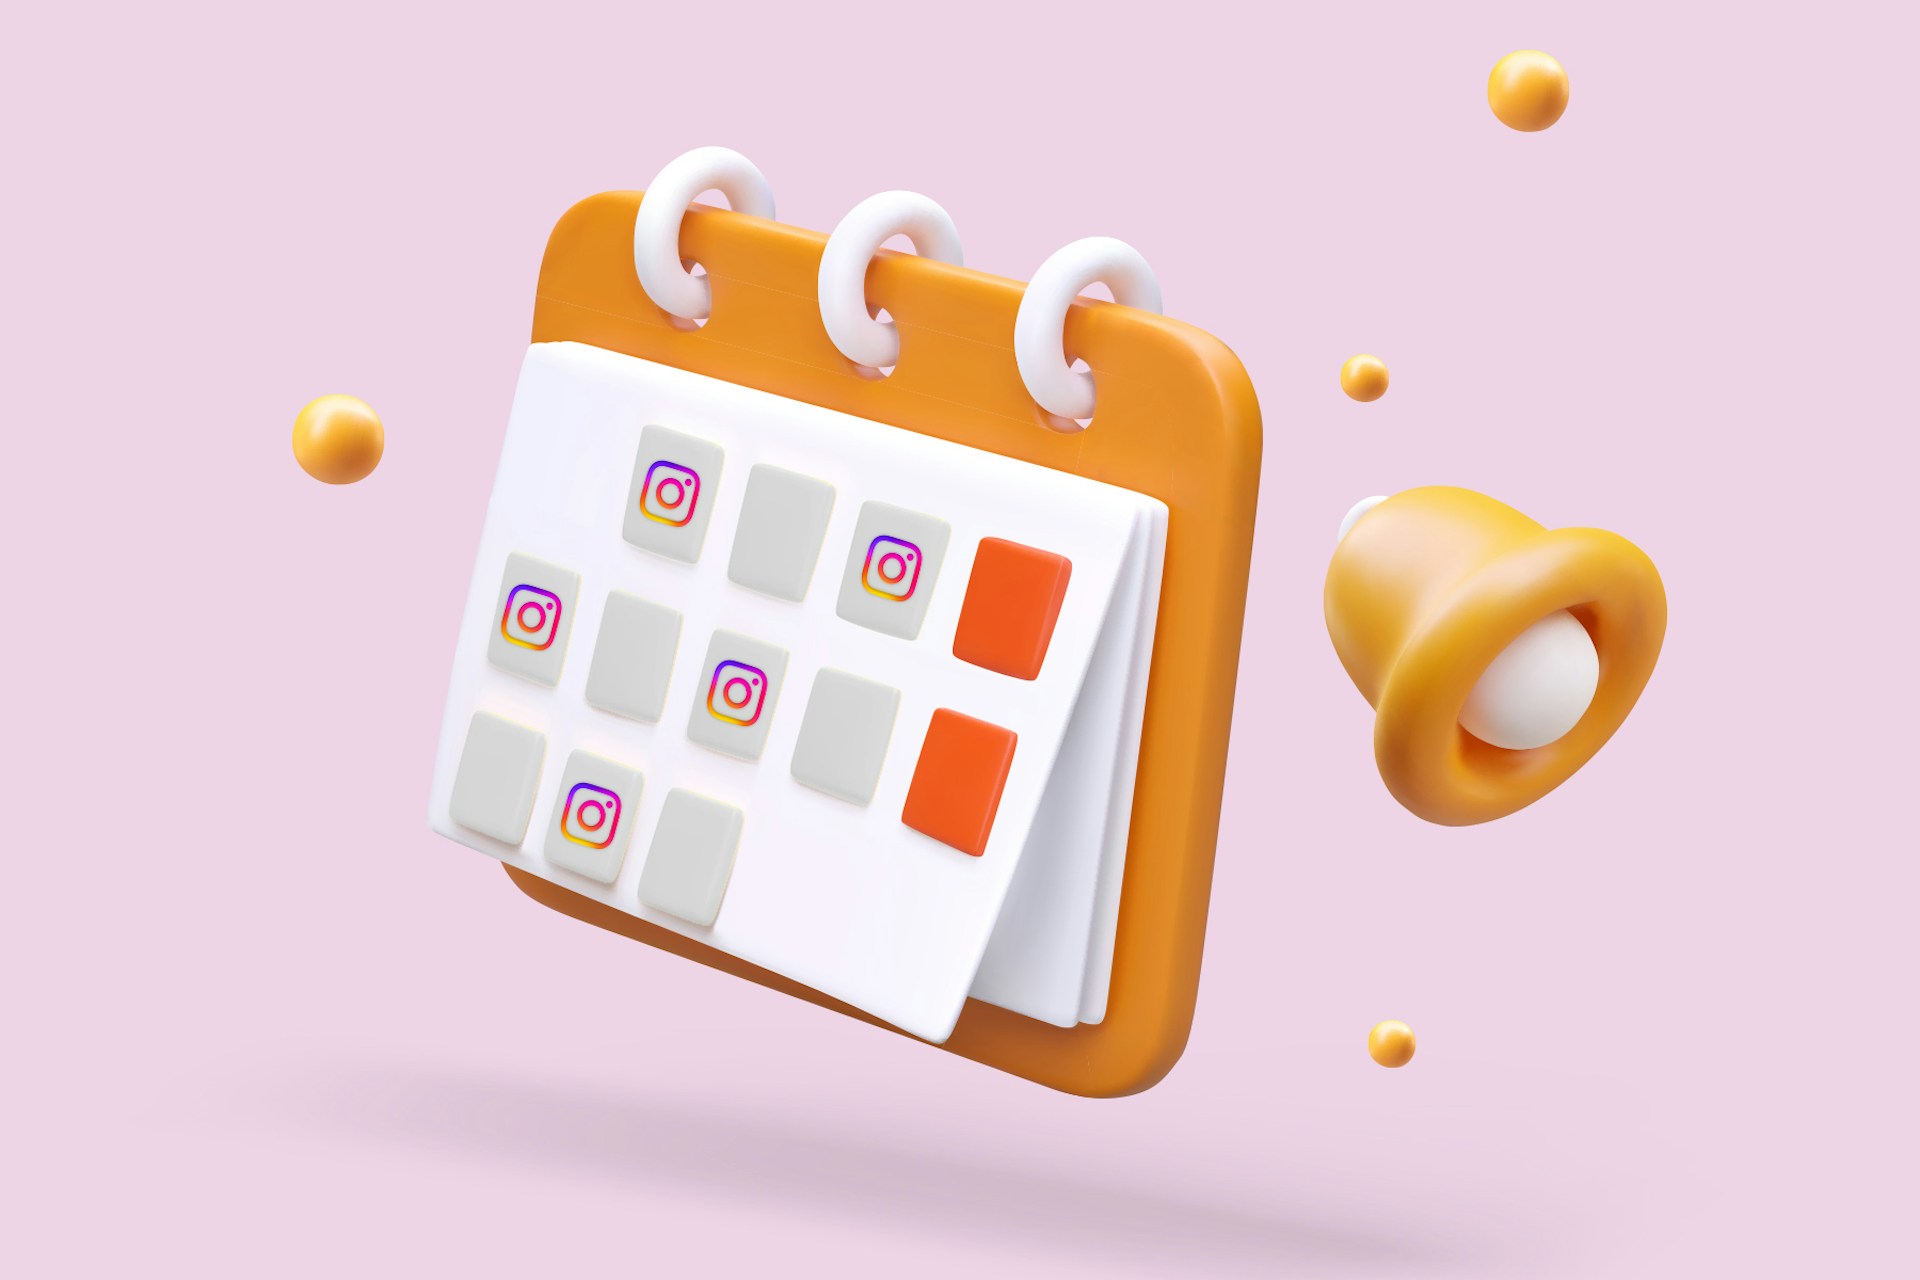 An illustration of a calendar with the Instagram logo on different days to represent how to schedule Instagram posts